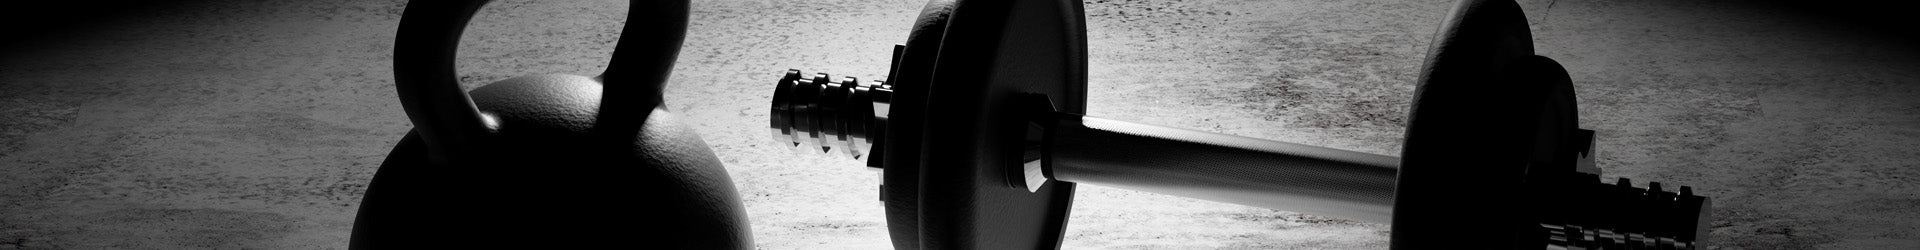 Equipped Gym - Free Weights